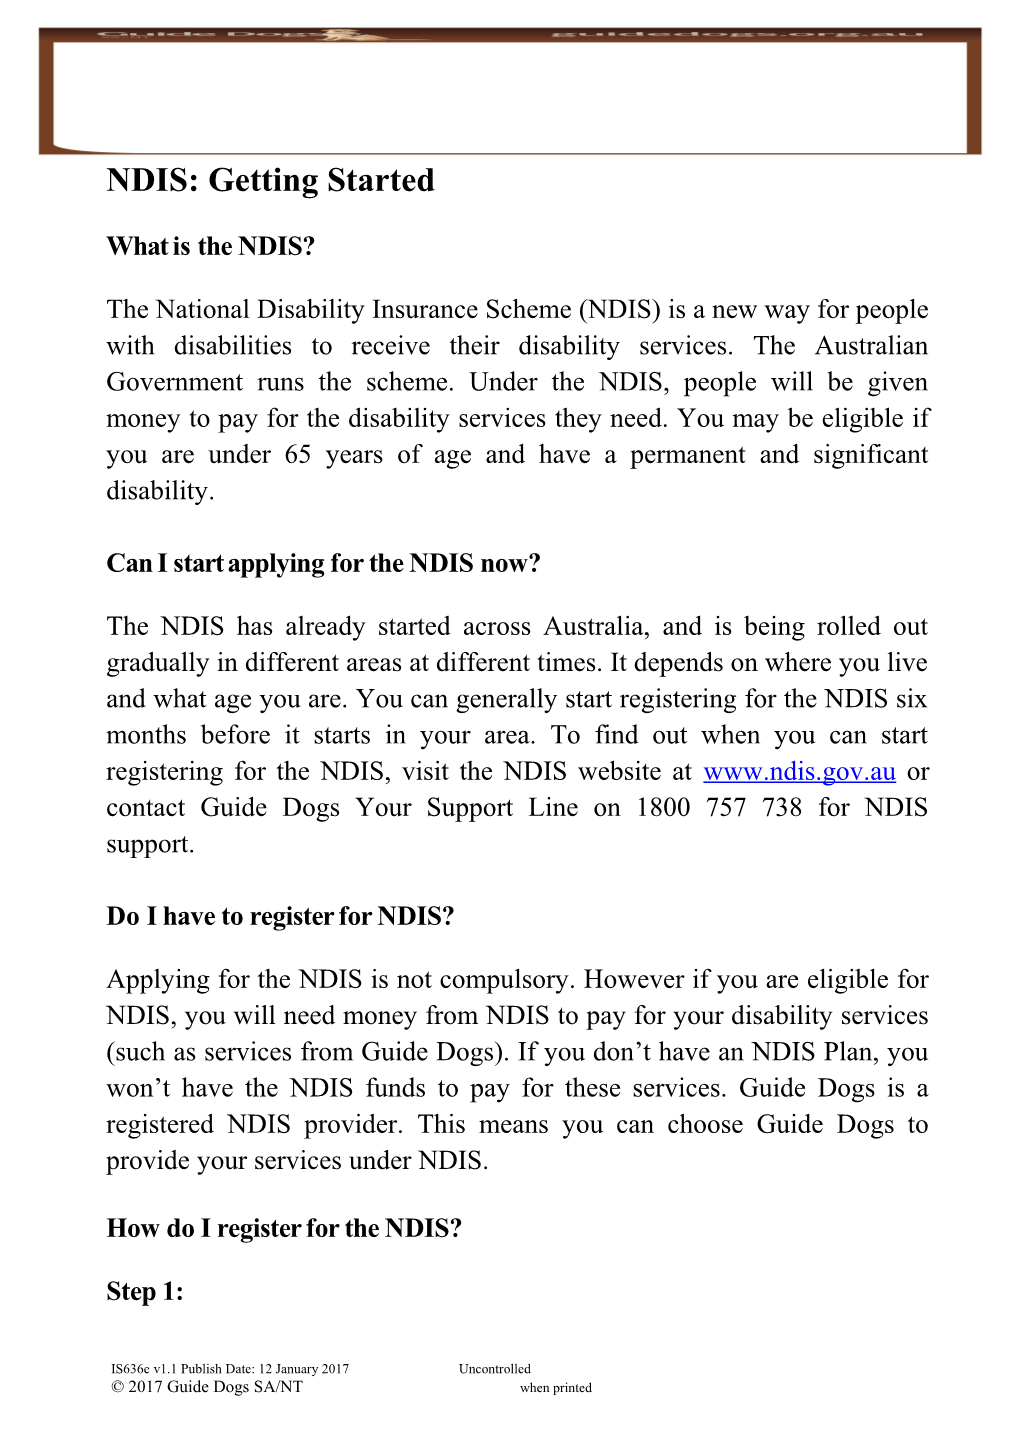 NDIS: Getting Started